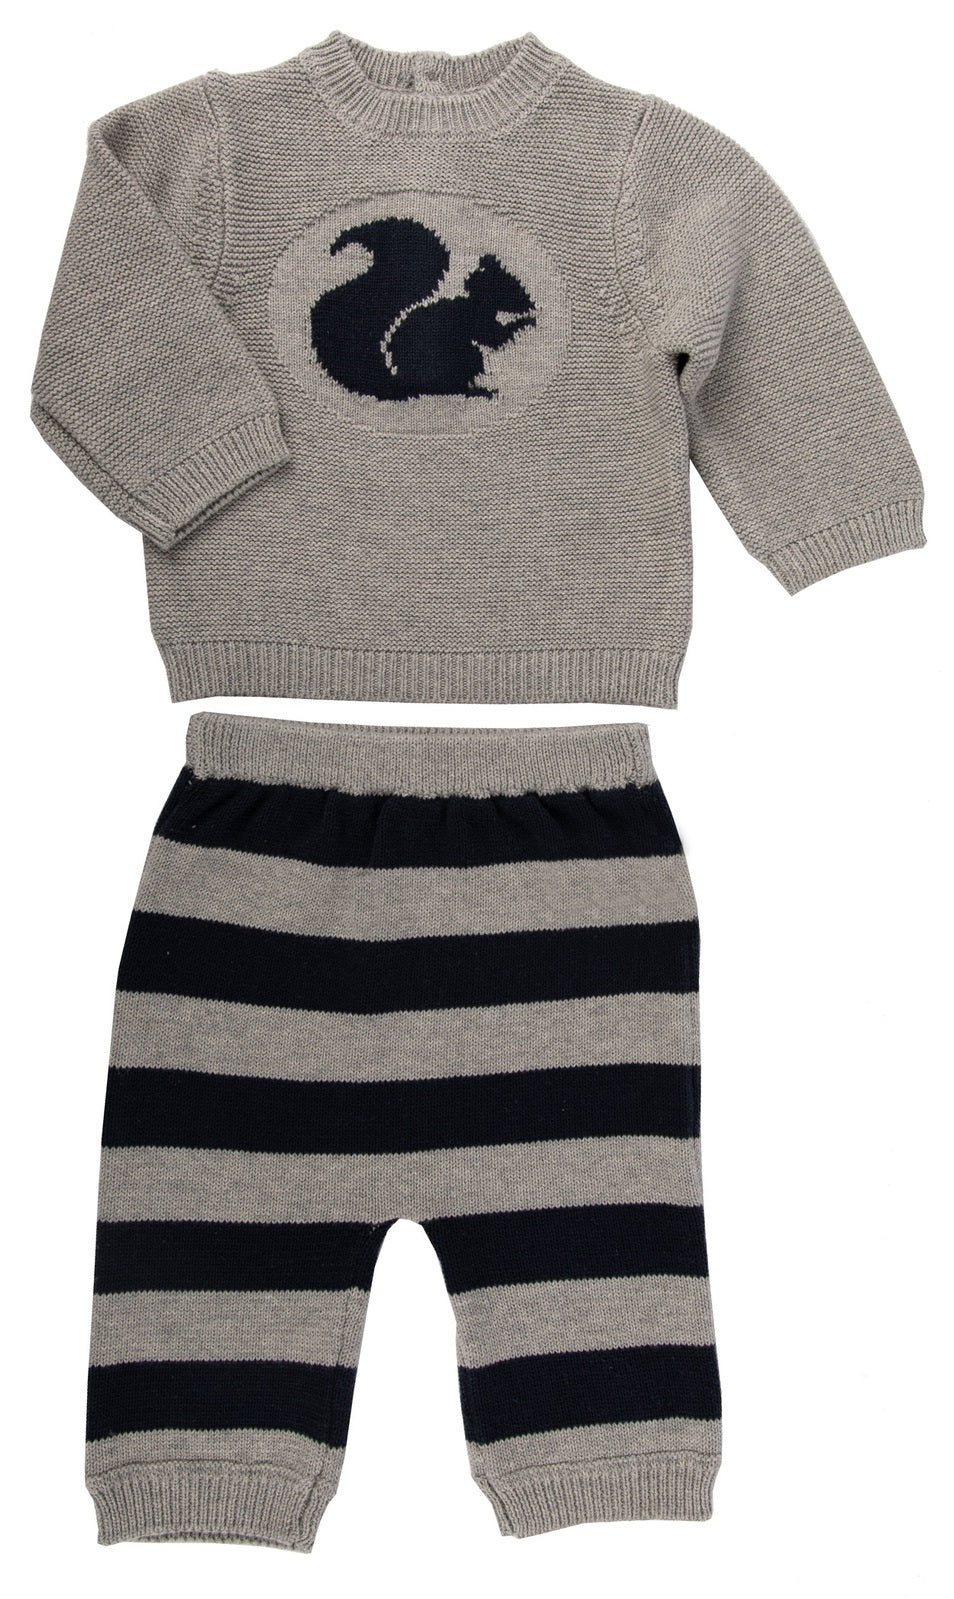 My Little Squirrel 100% Cotton Knitted Baby Suit Set